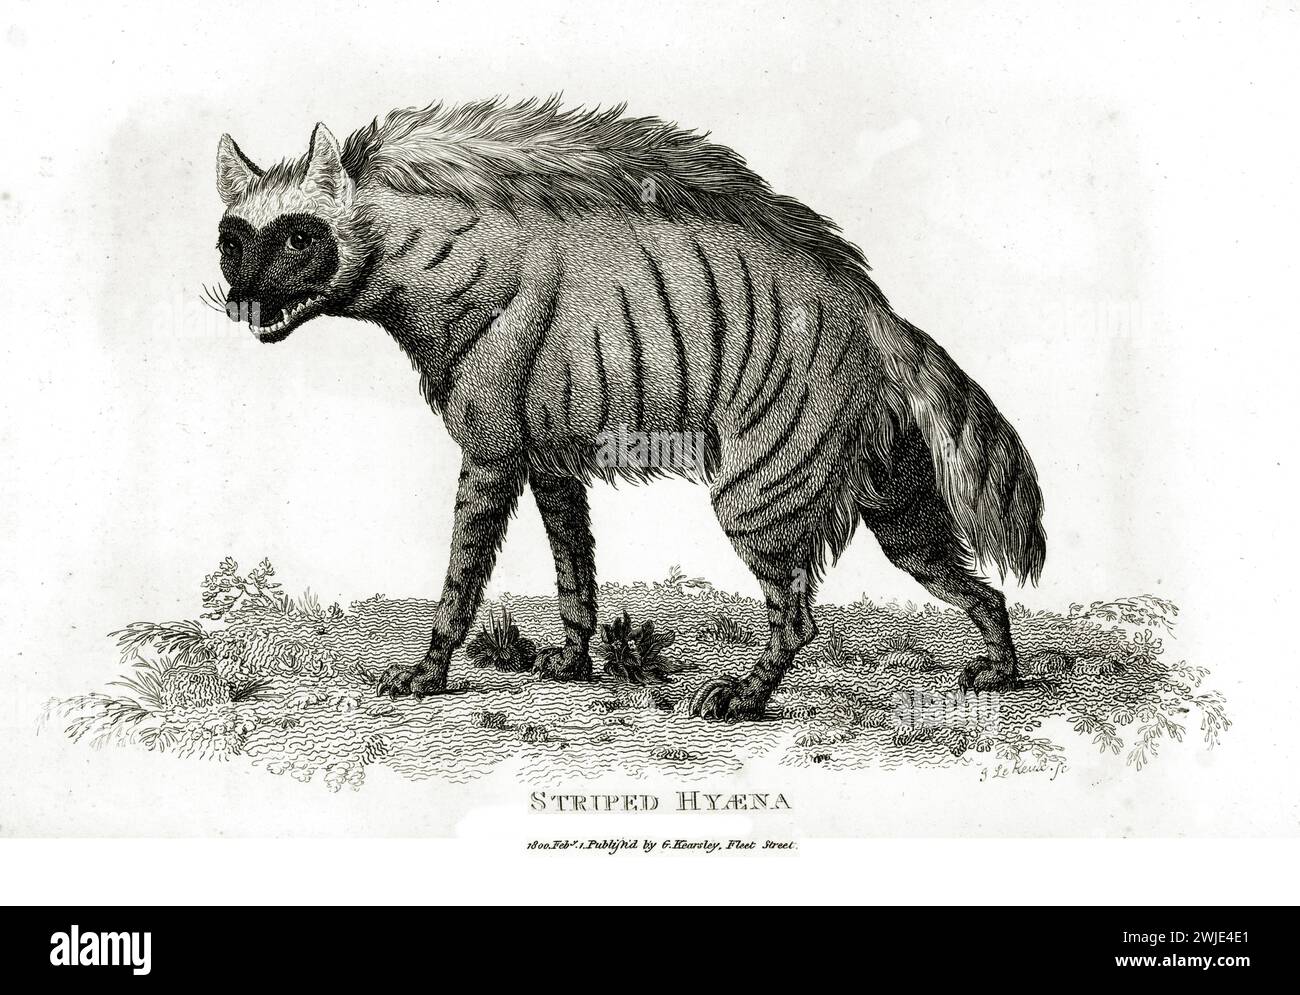 Old engraved illustration of Striped Hyena. Created by George Shaw, published in Zoological Lectures, London, 1809 Stock Photo